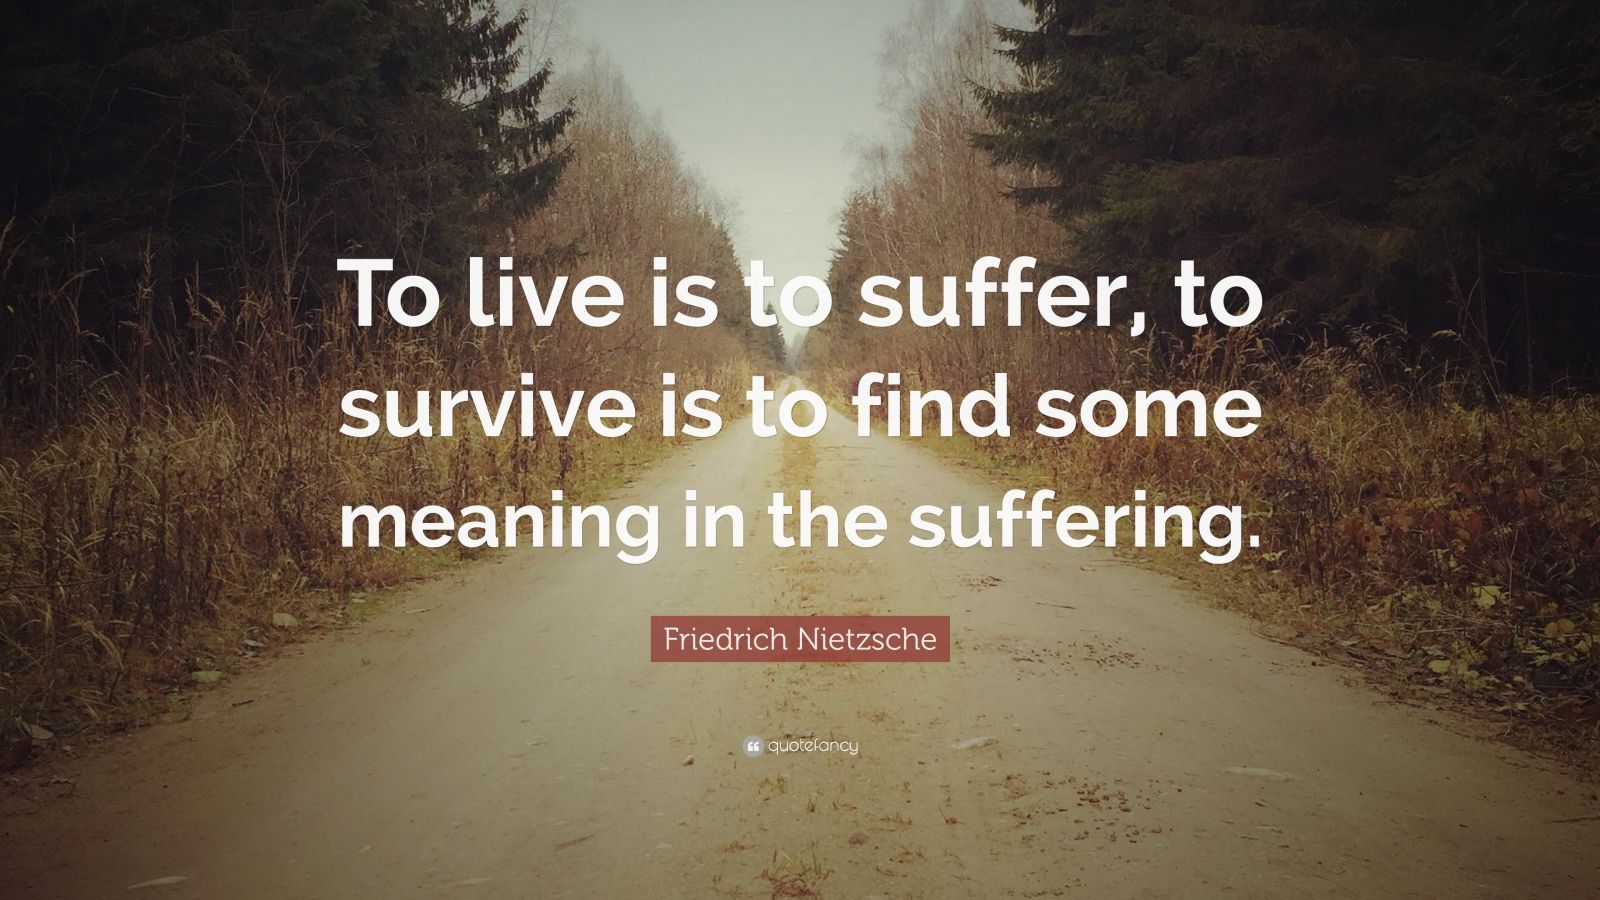 Friedrich Nietzsche Quote: “To live is to suffer, to survive is to find